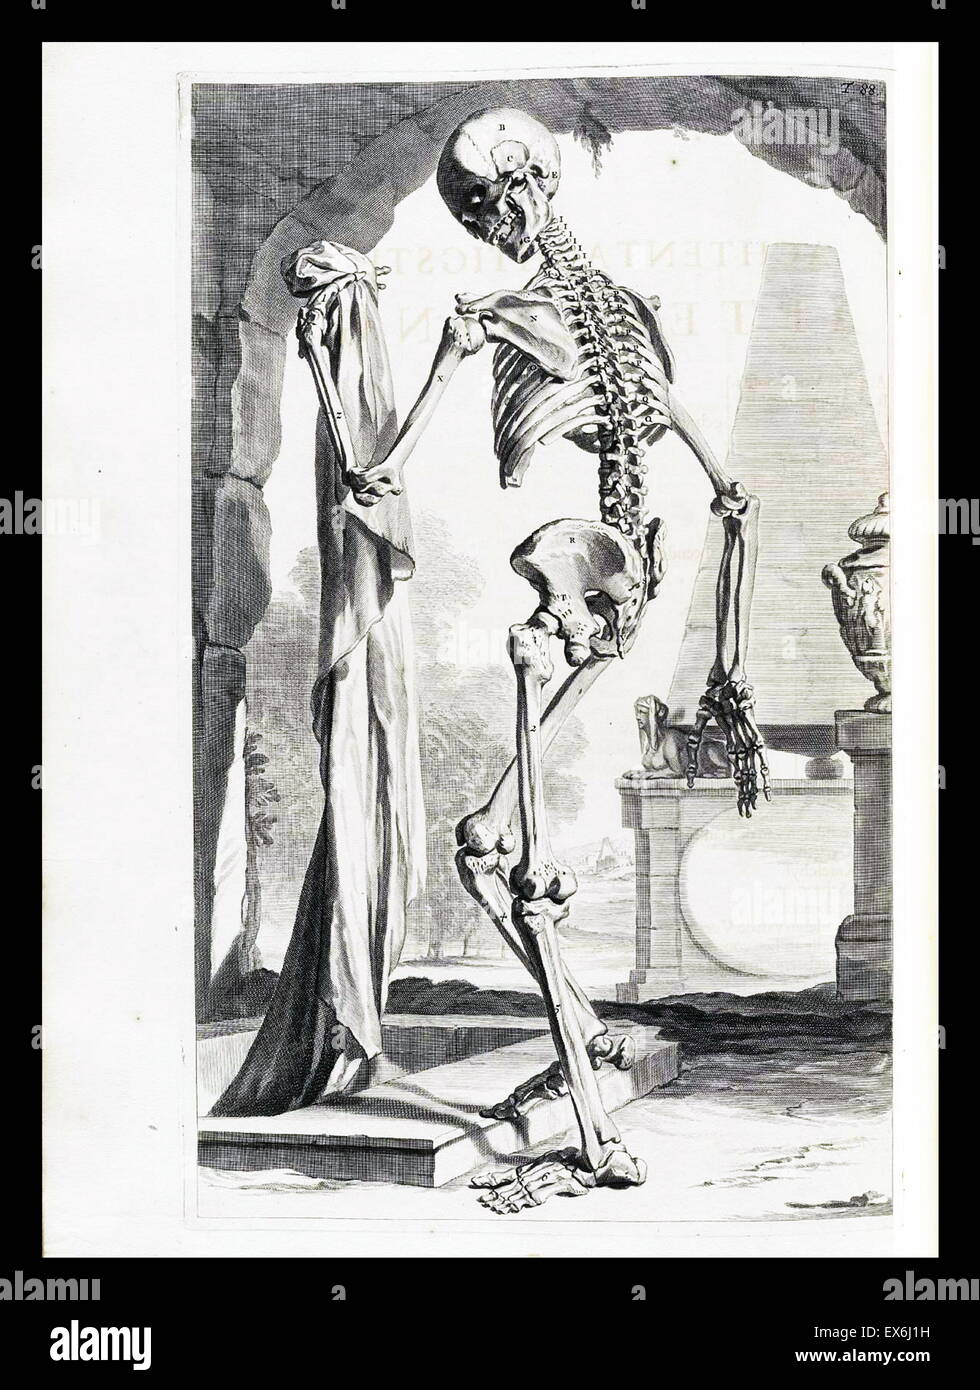 Illustrations by Govard Bidloo, from the anatomy textbook 'Ontleding des menschelyken Lichaams'. (Amsterdam 1690).Govard Bidloo was born in Amsterdam in 1649 and became professor of anatomy at The Hague from 1688 to 1701 Stock Photo